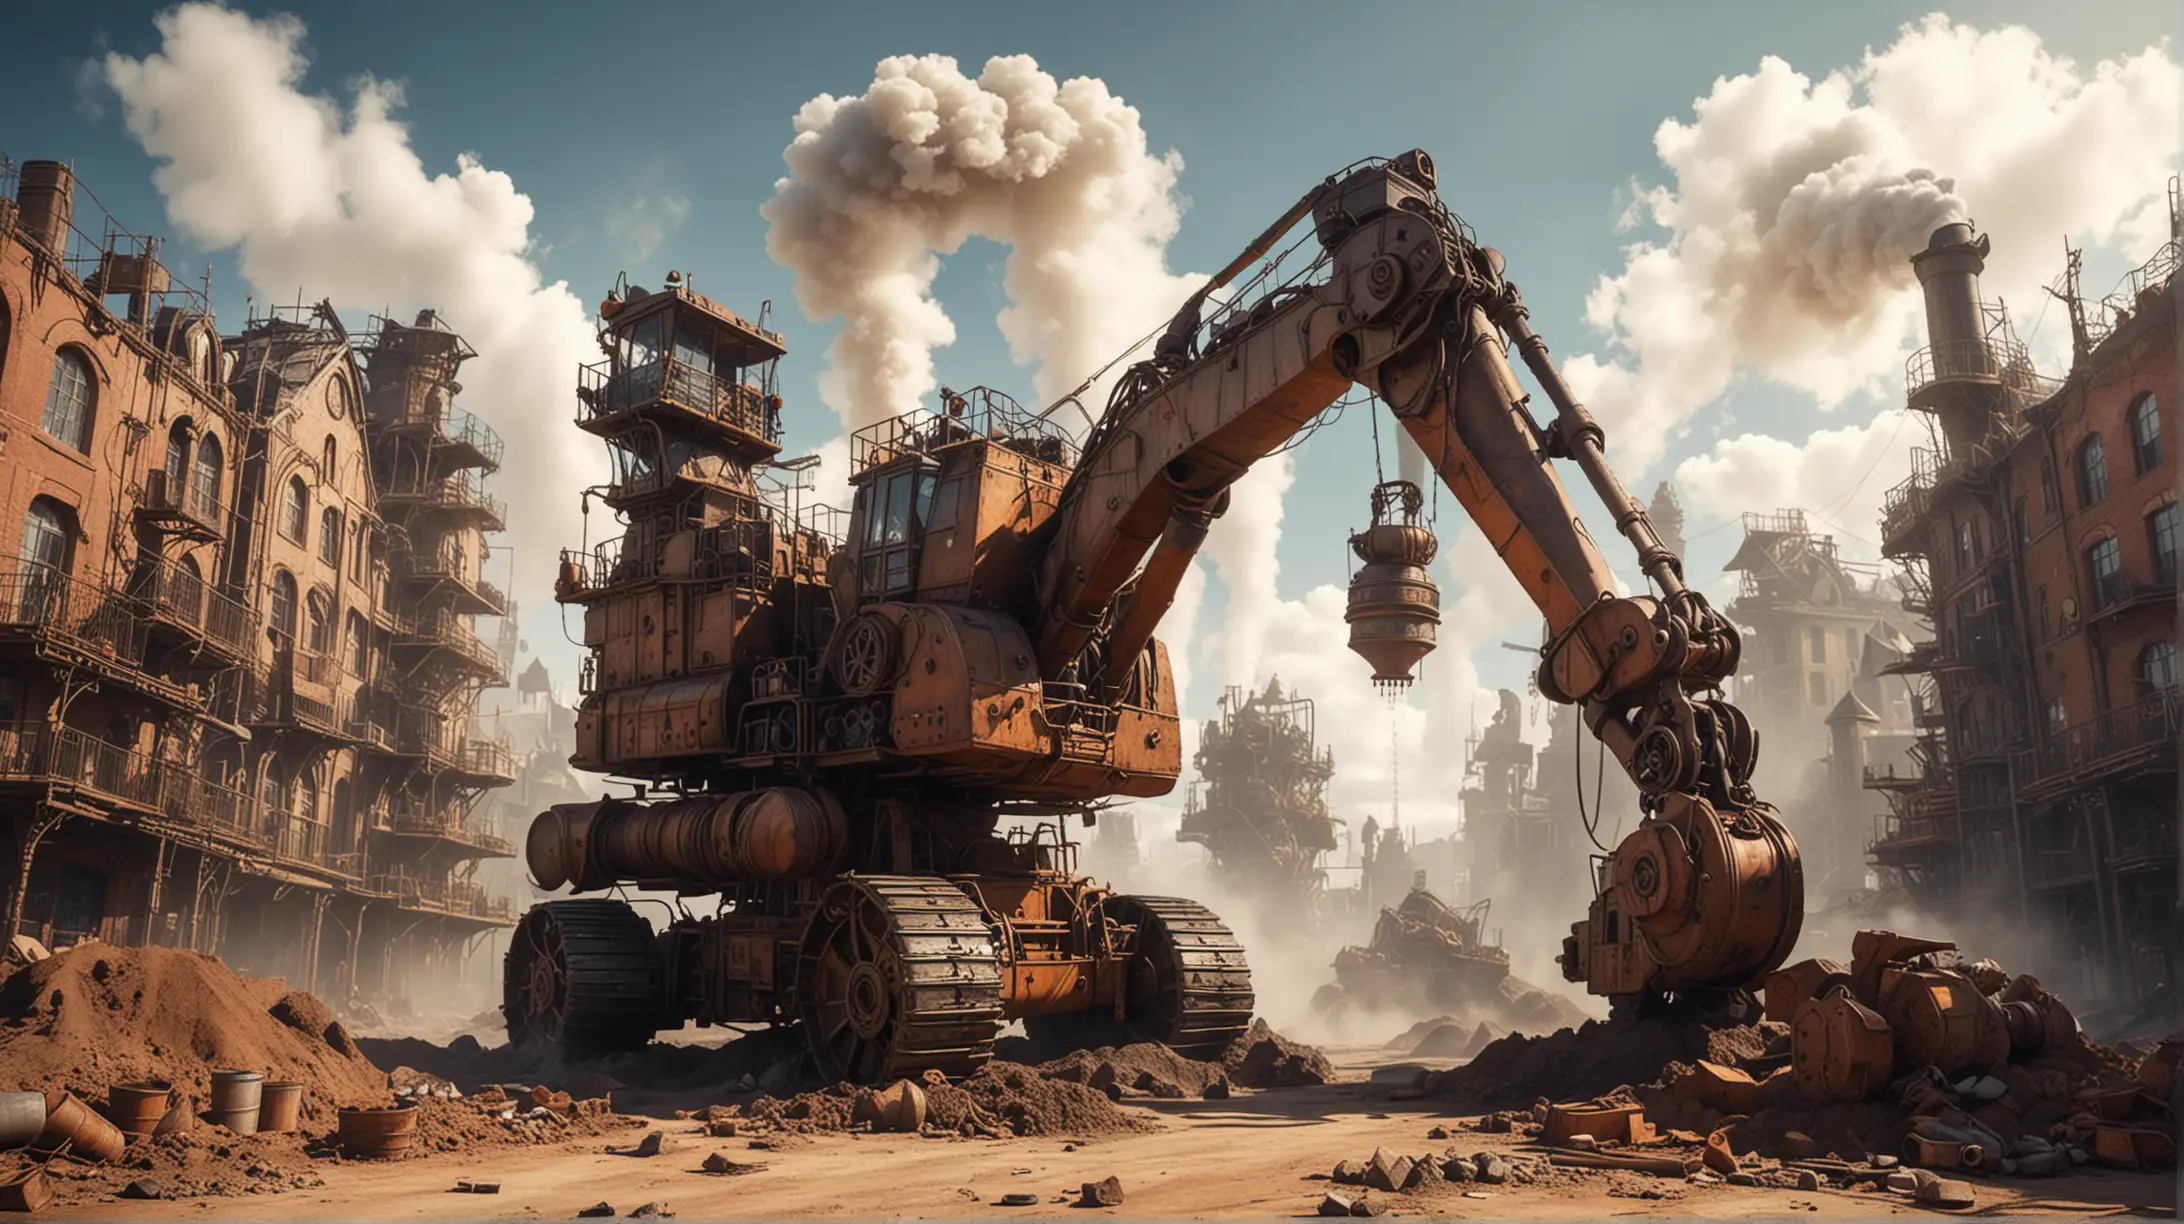 Steampunk Excavator Digging in Sunlit Cityscape